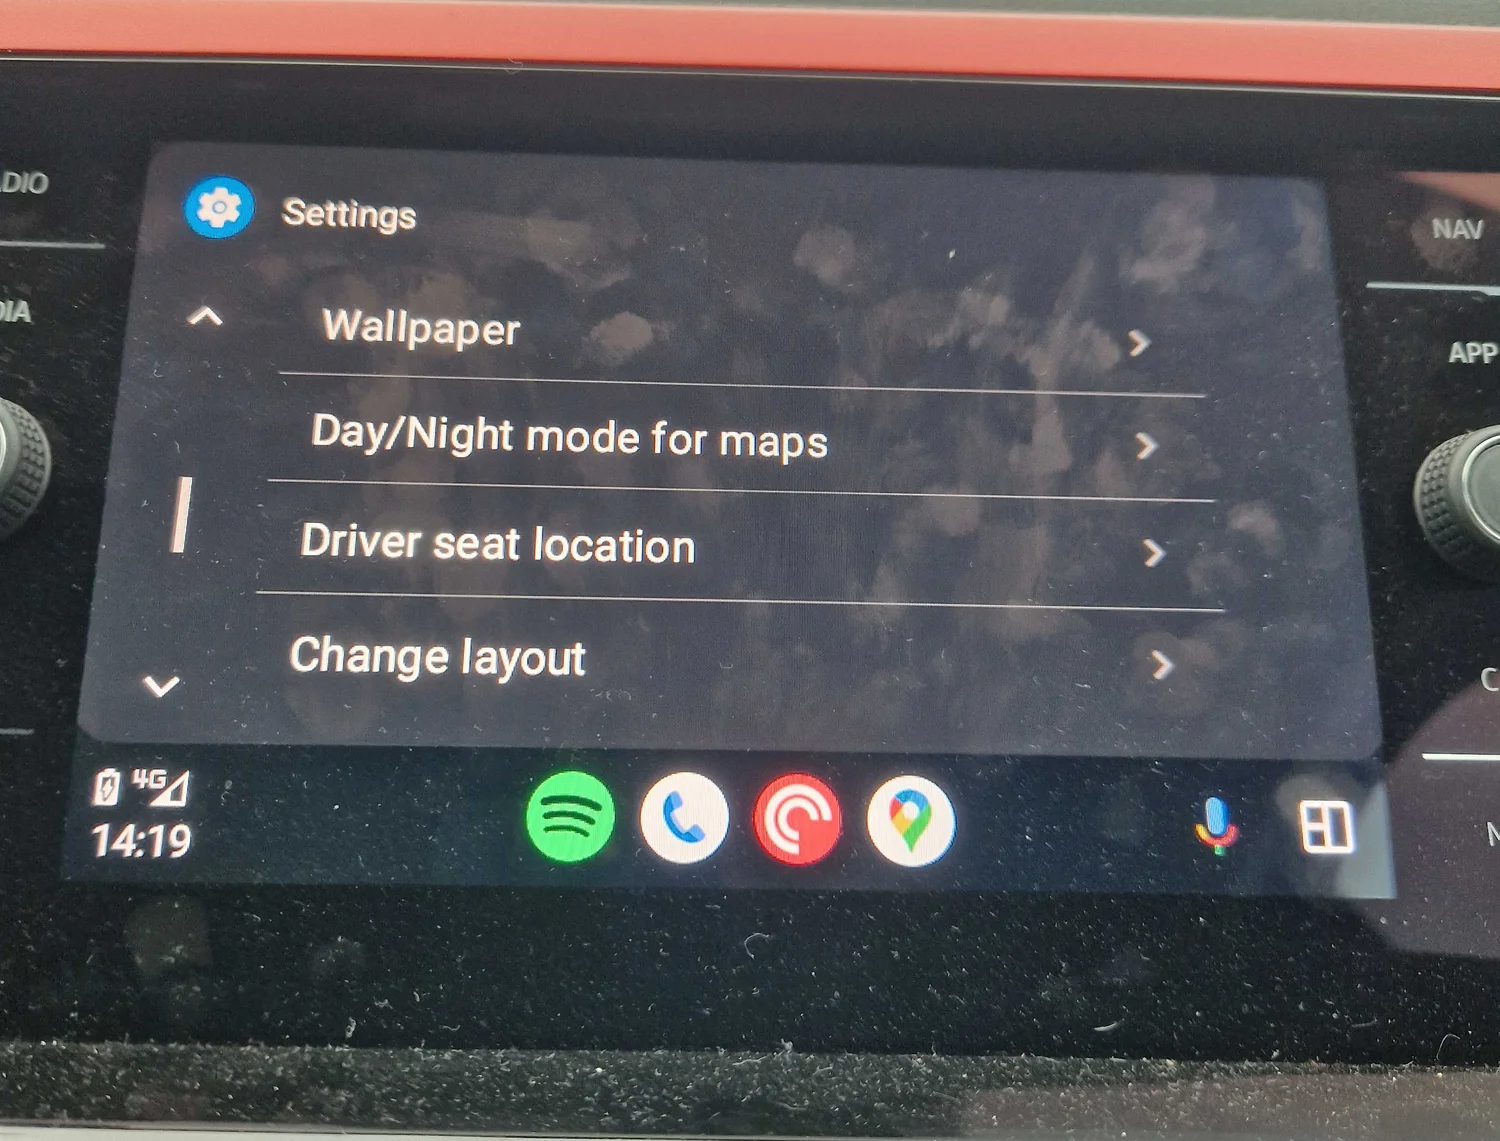 "Day/Night mode for maps" is the setting you're looking for. (Yes, I should probably have cleaned the screen before taking the picture)